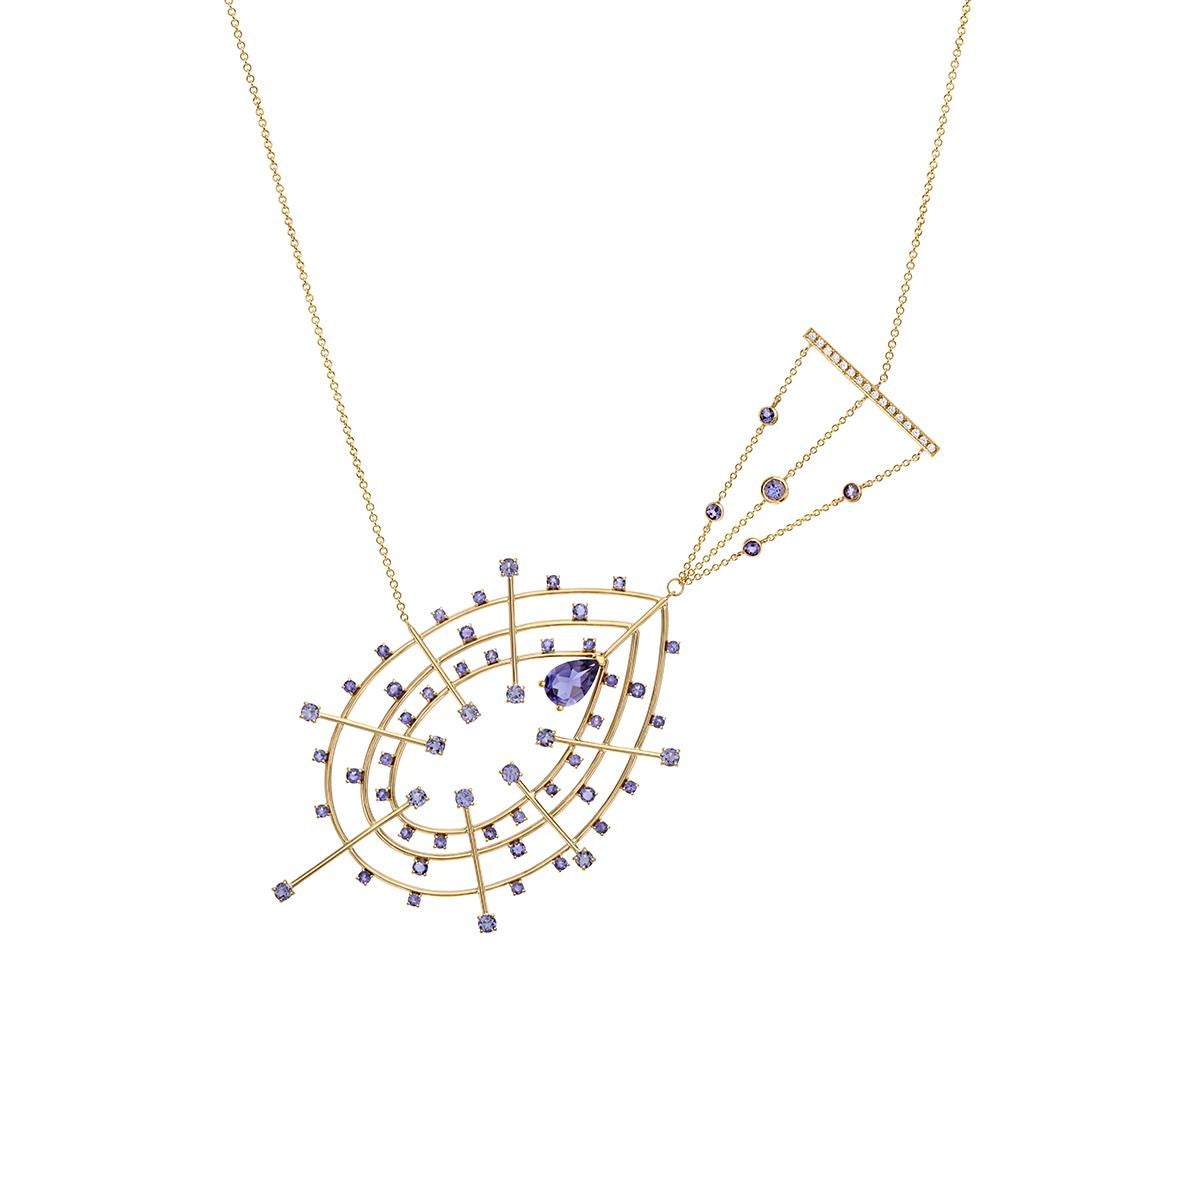 Contemporary Pear Radial Shaped Necklace in 18Kt Yellow Gold with Iolites and Diamonds Stones For Sale